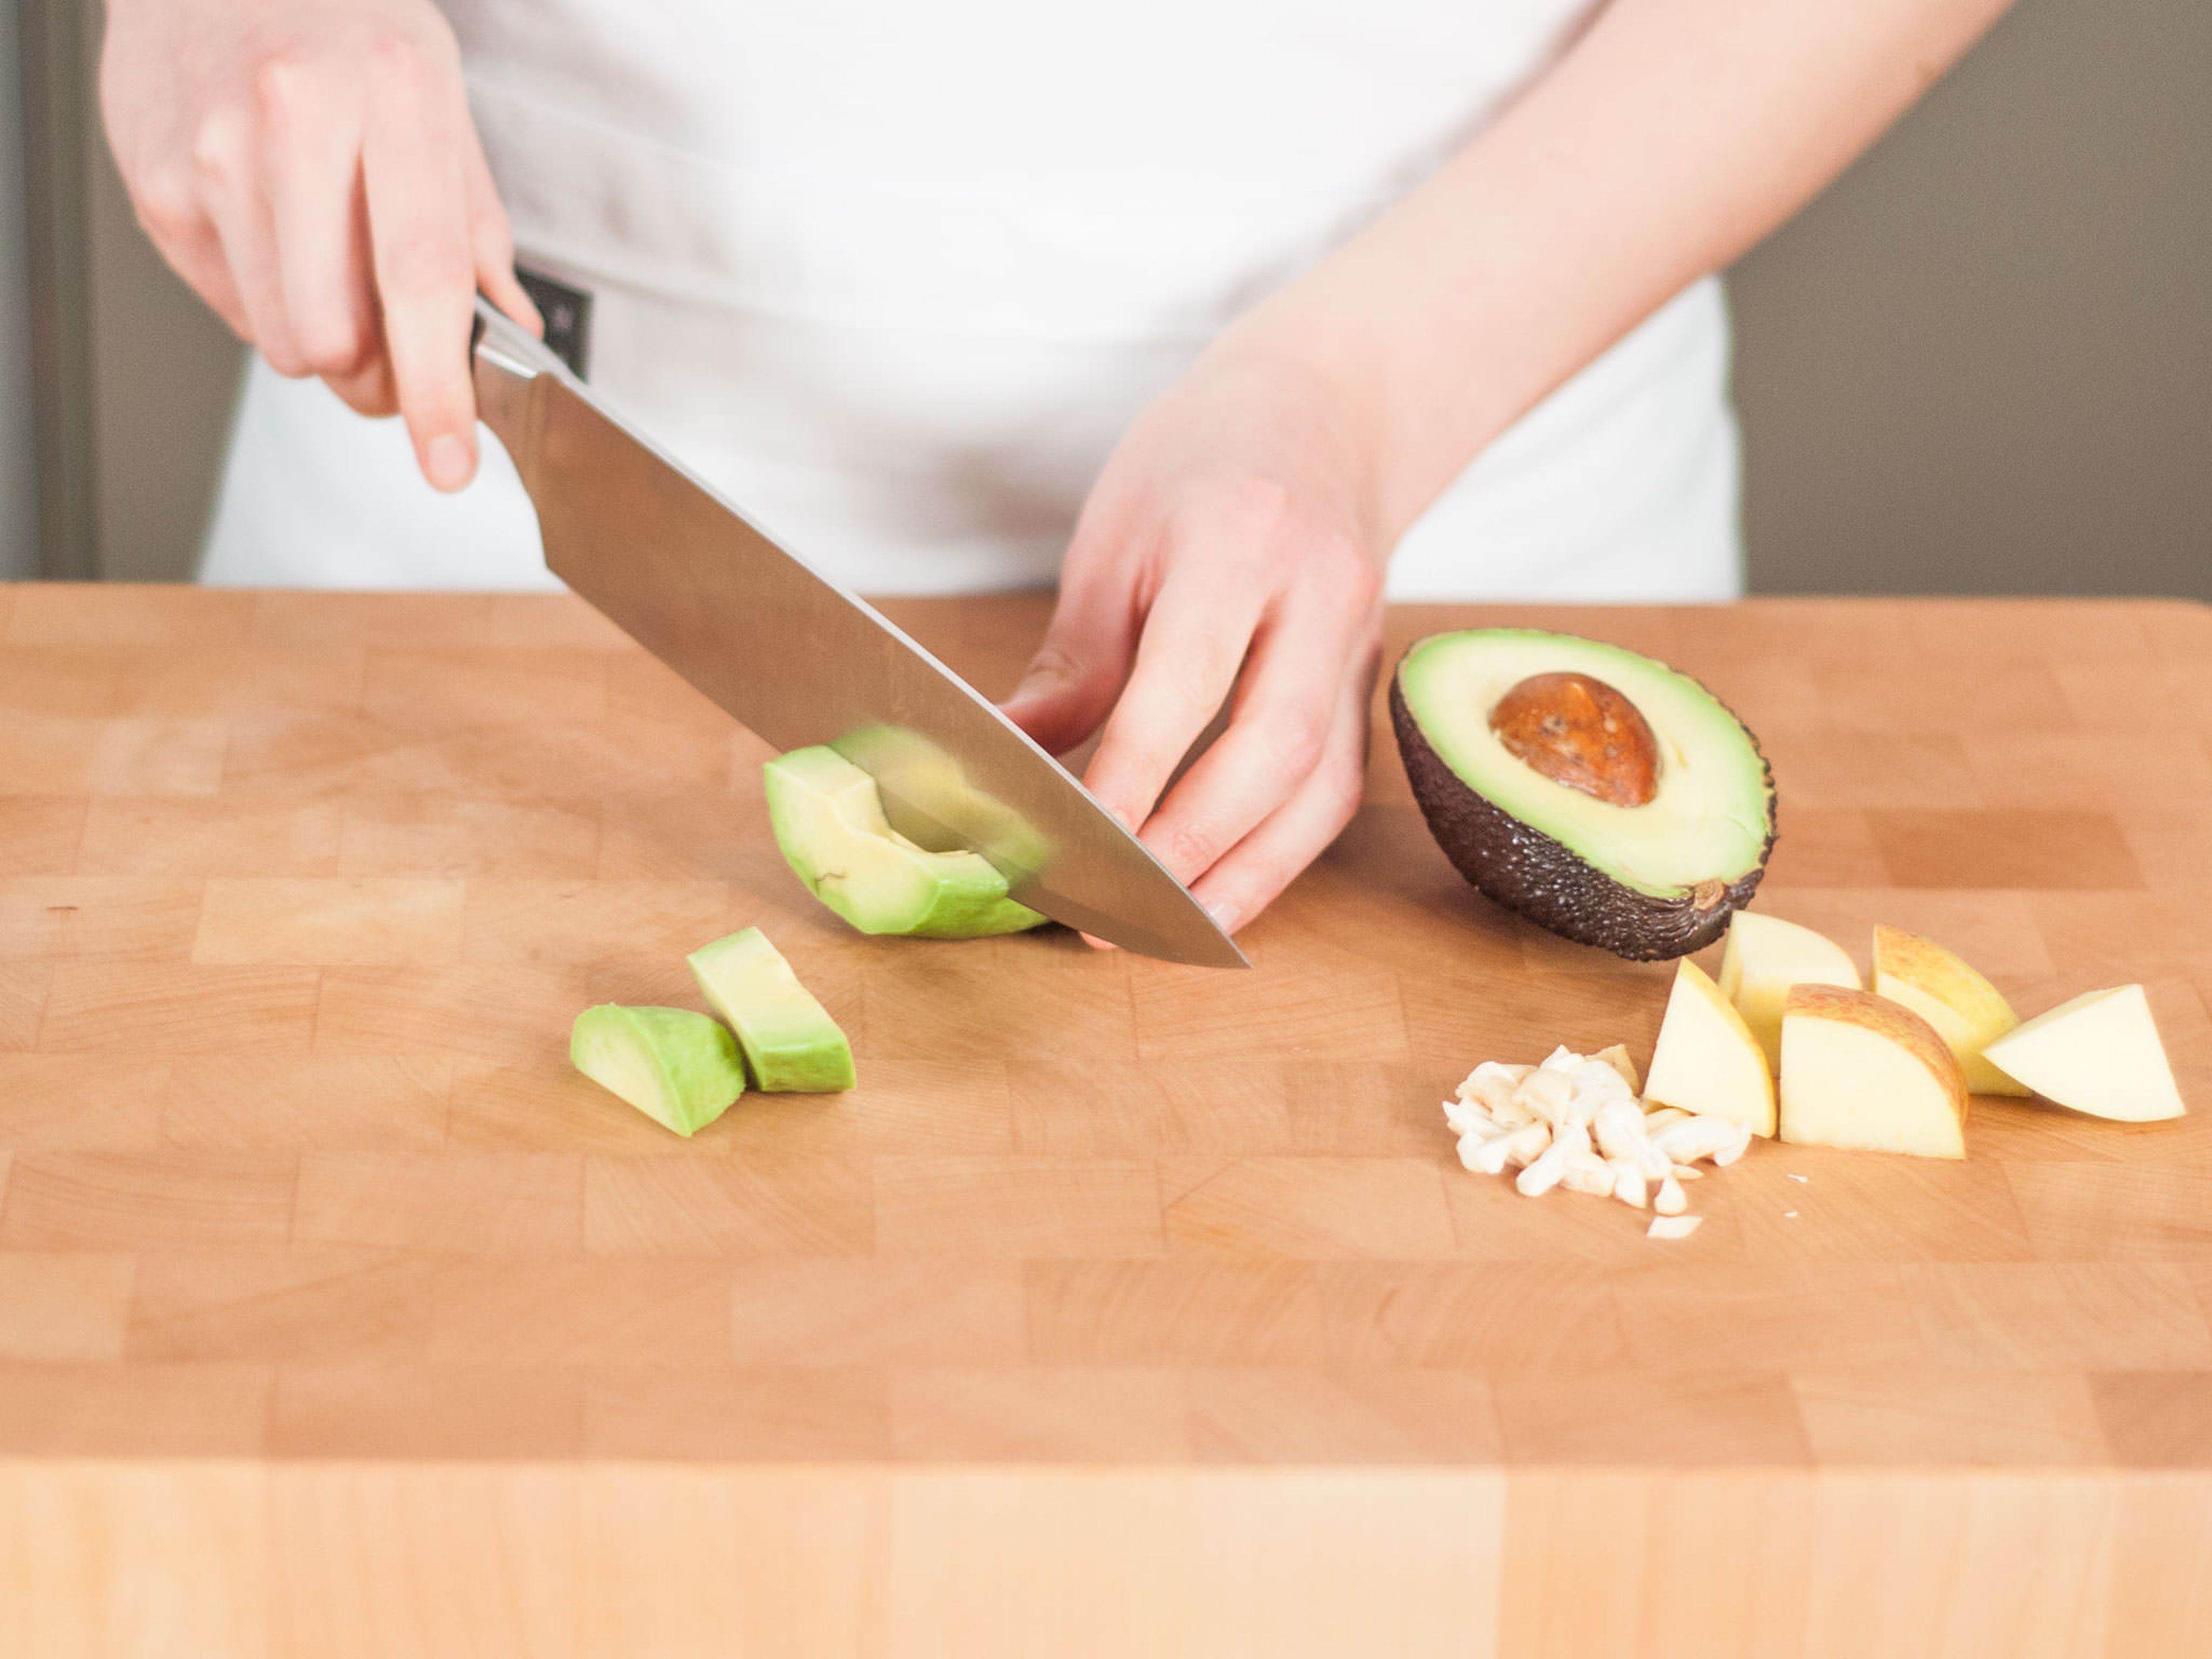 Roughly chop apple, cucumber, cashews, and avocado.